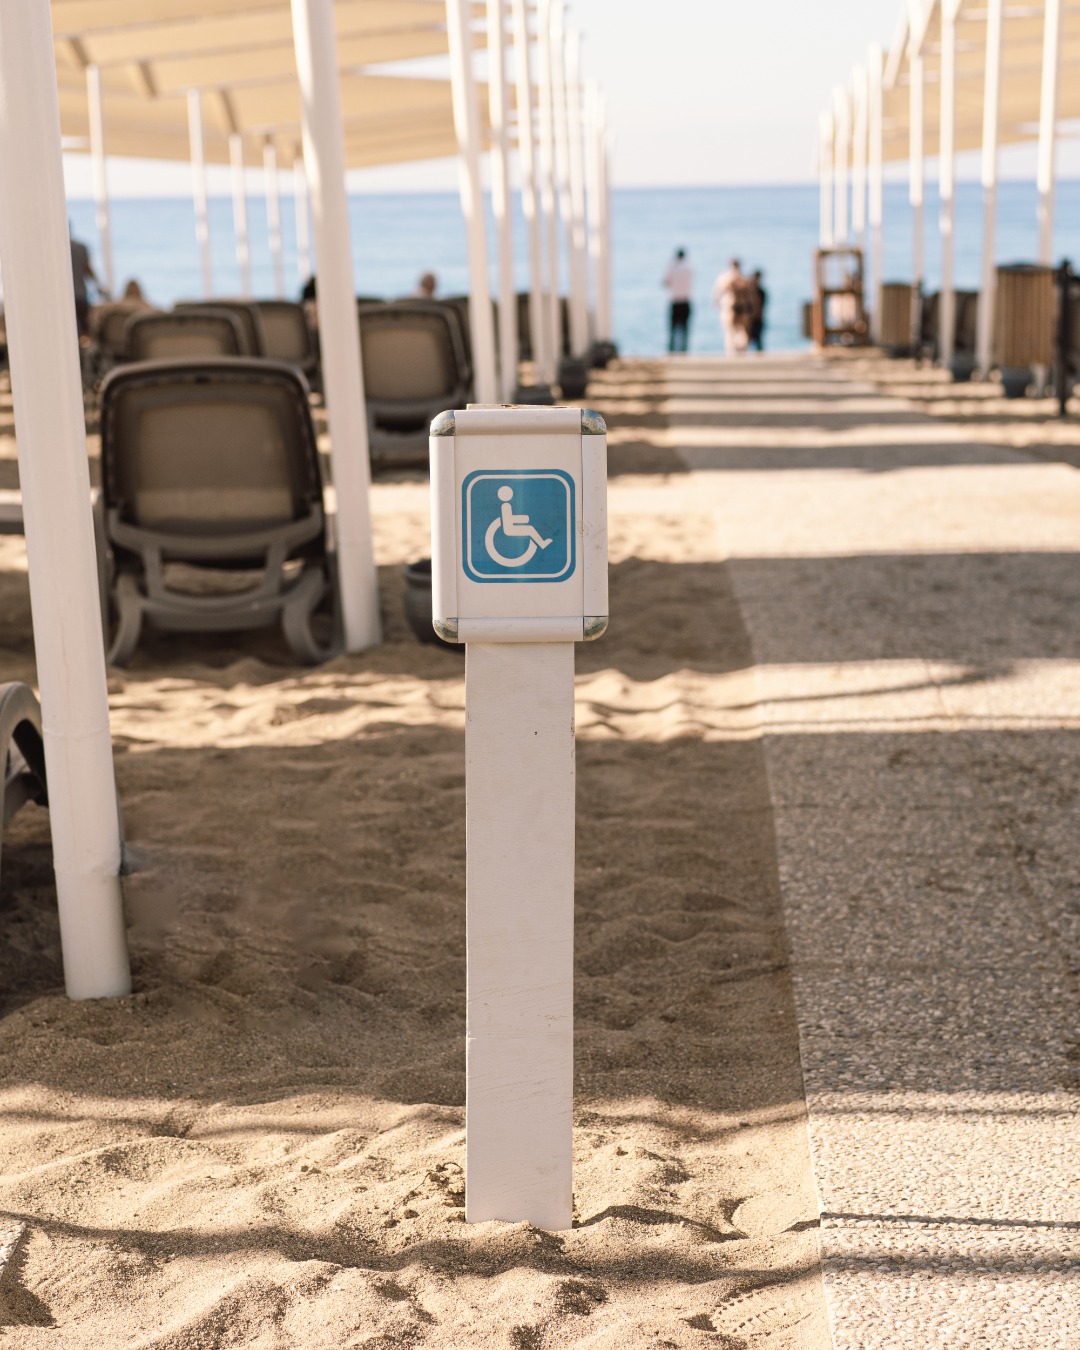 Accessible path leading to beach.